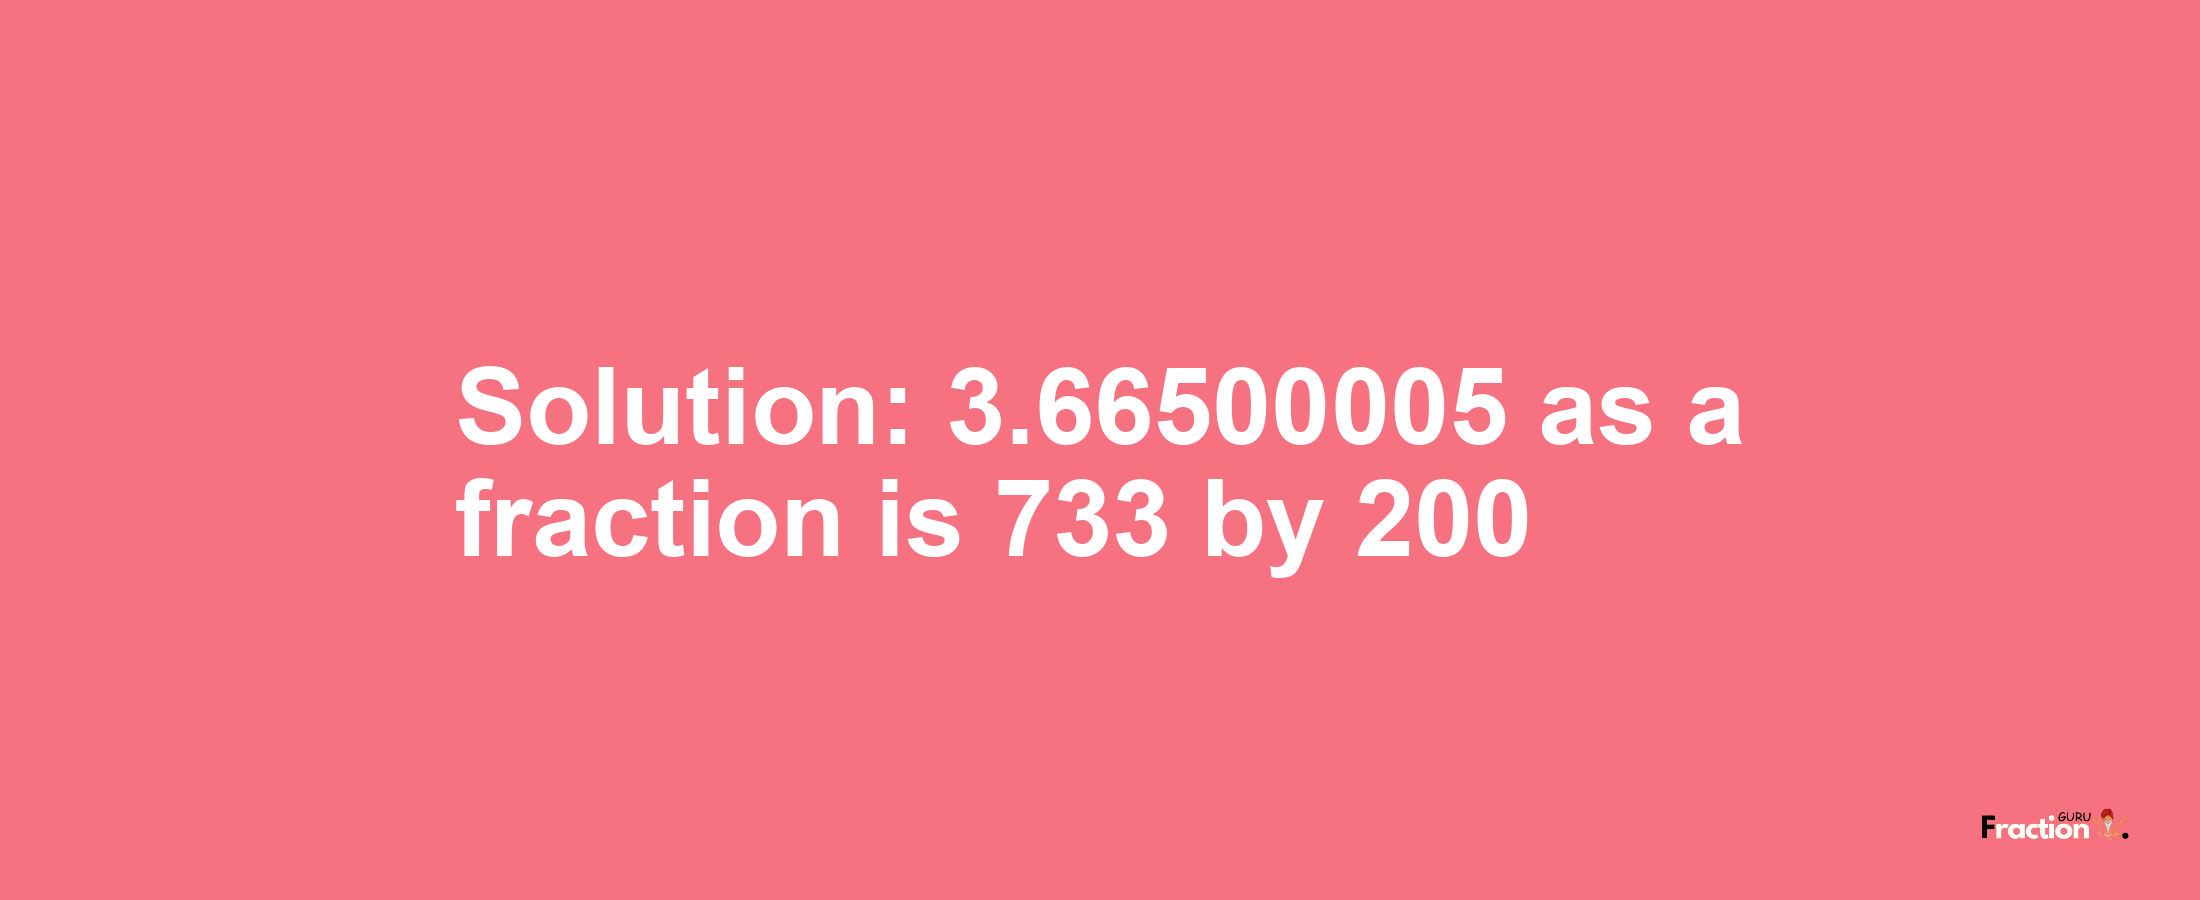 Solution:3.66500005 as a fraction is 733/200